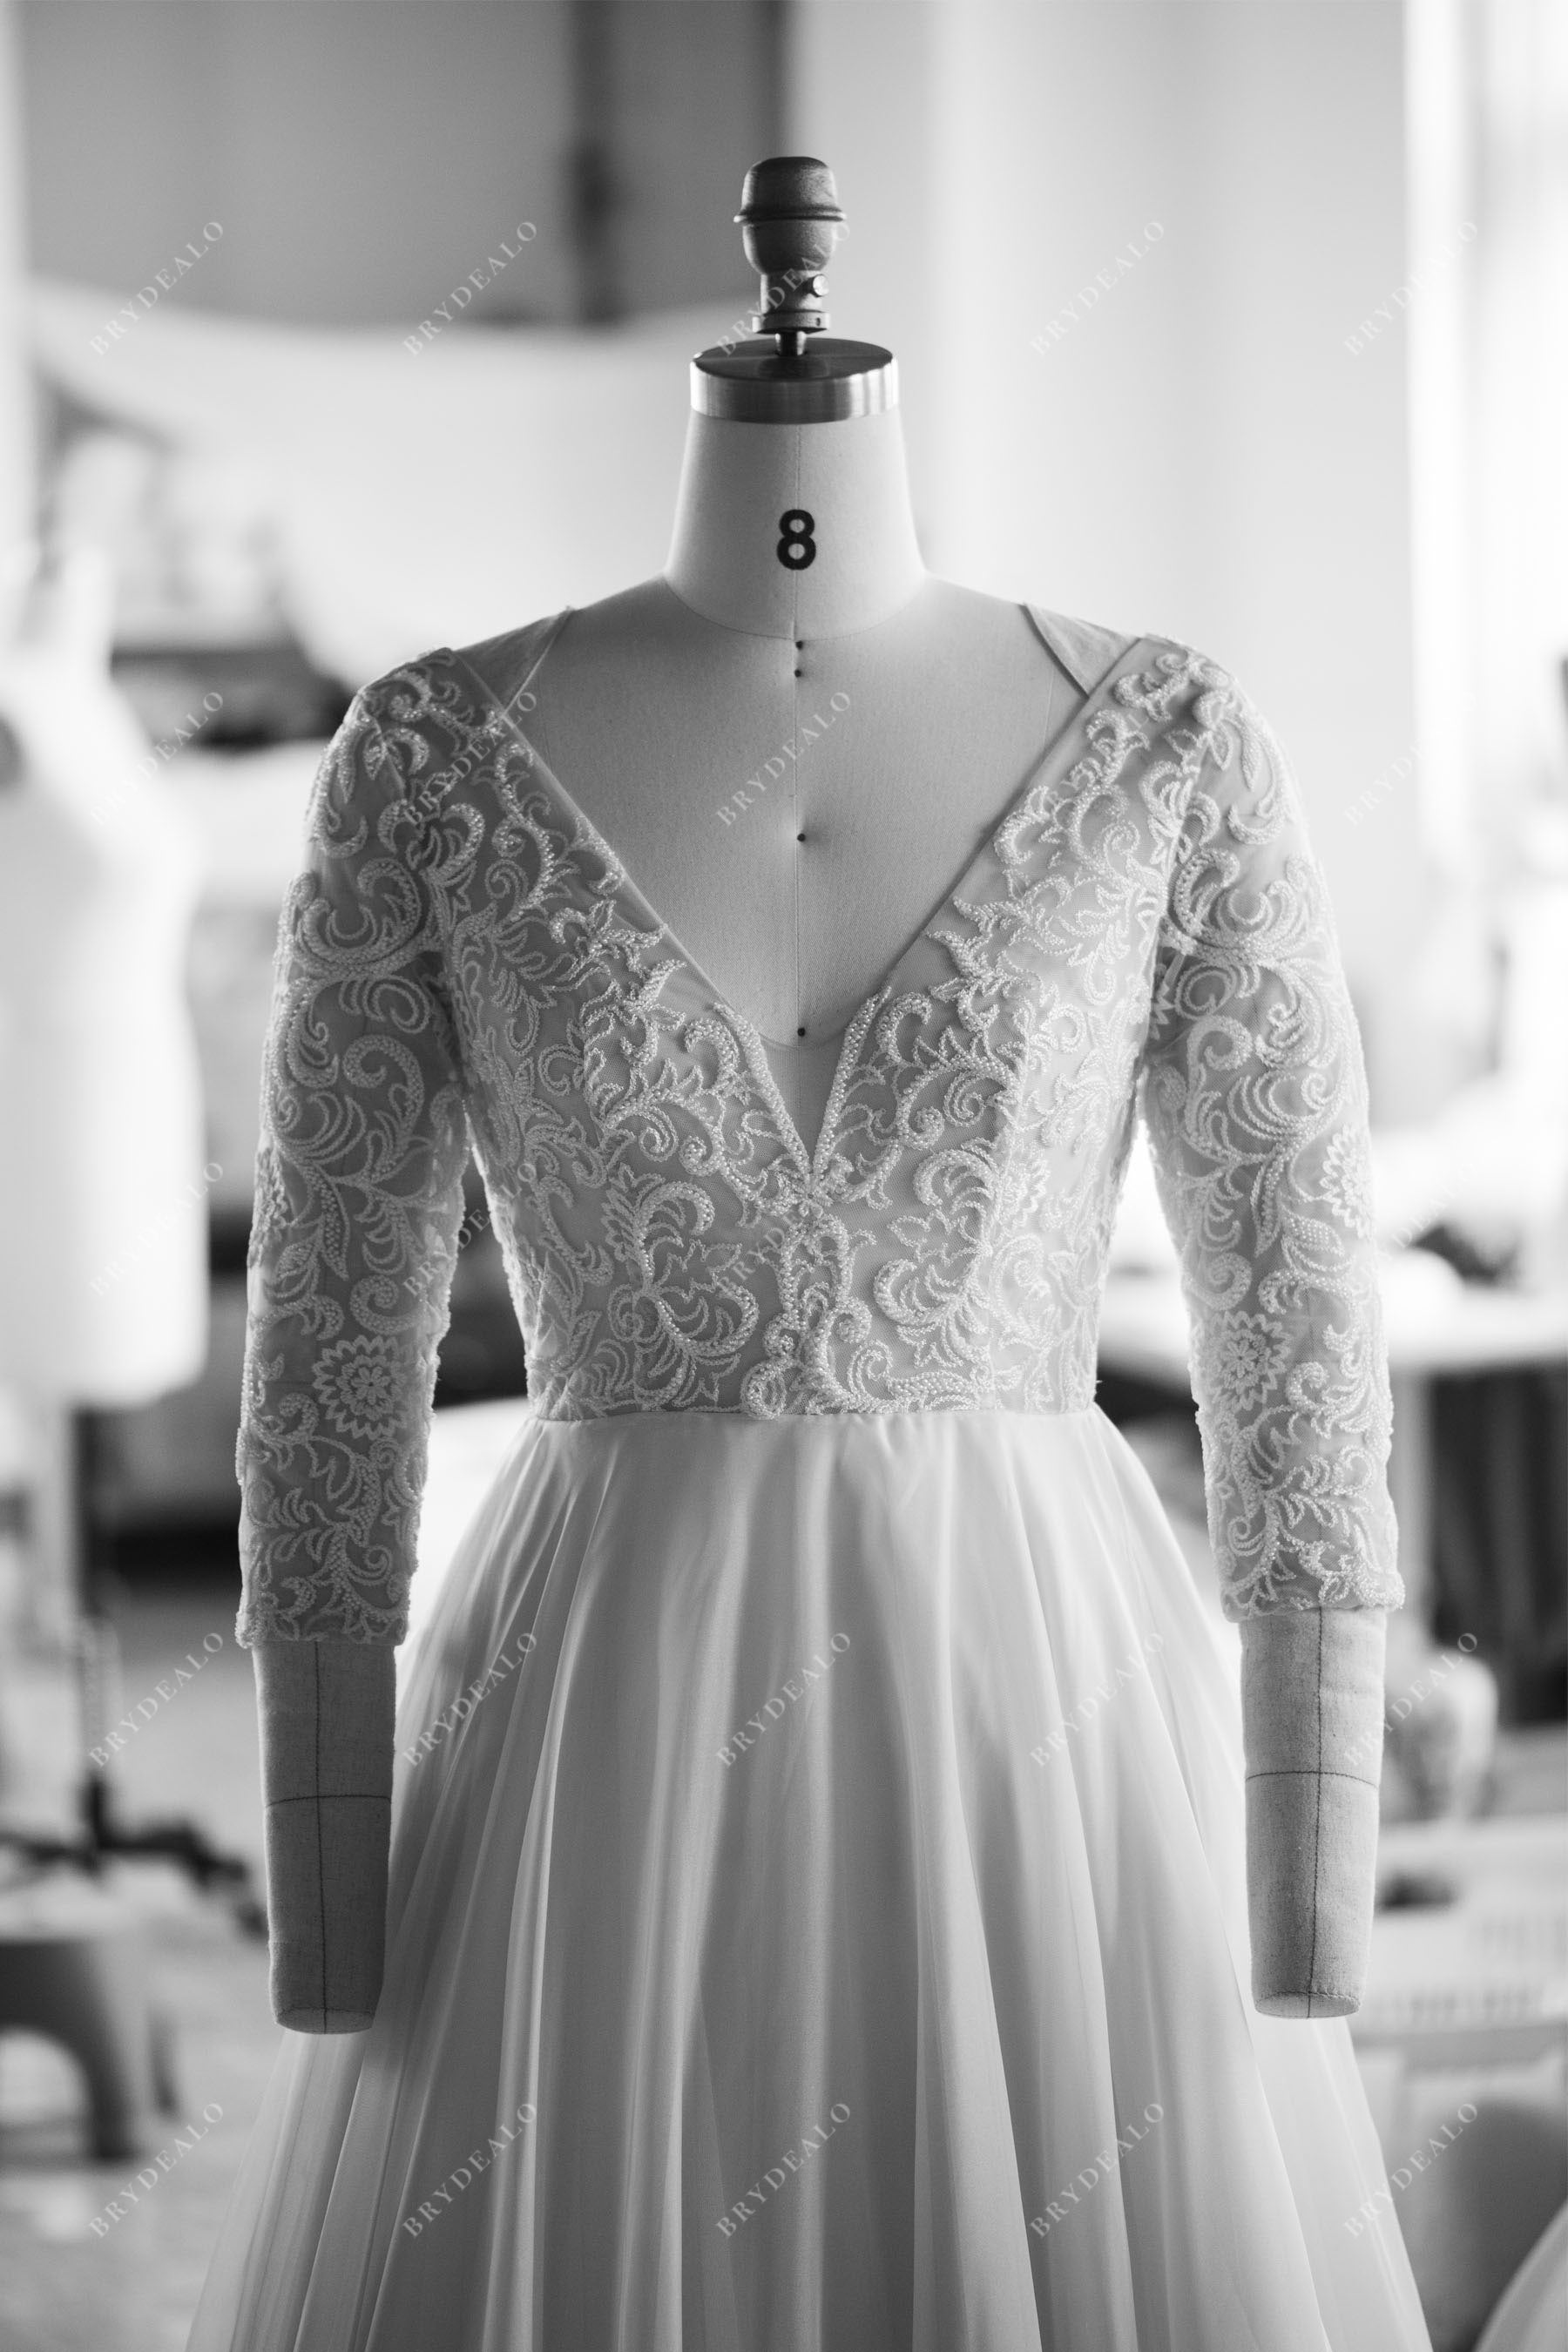 Light Champagne Tulle With Illusion Lace Long Sleeves Wedding